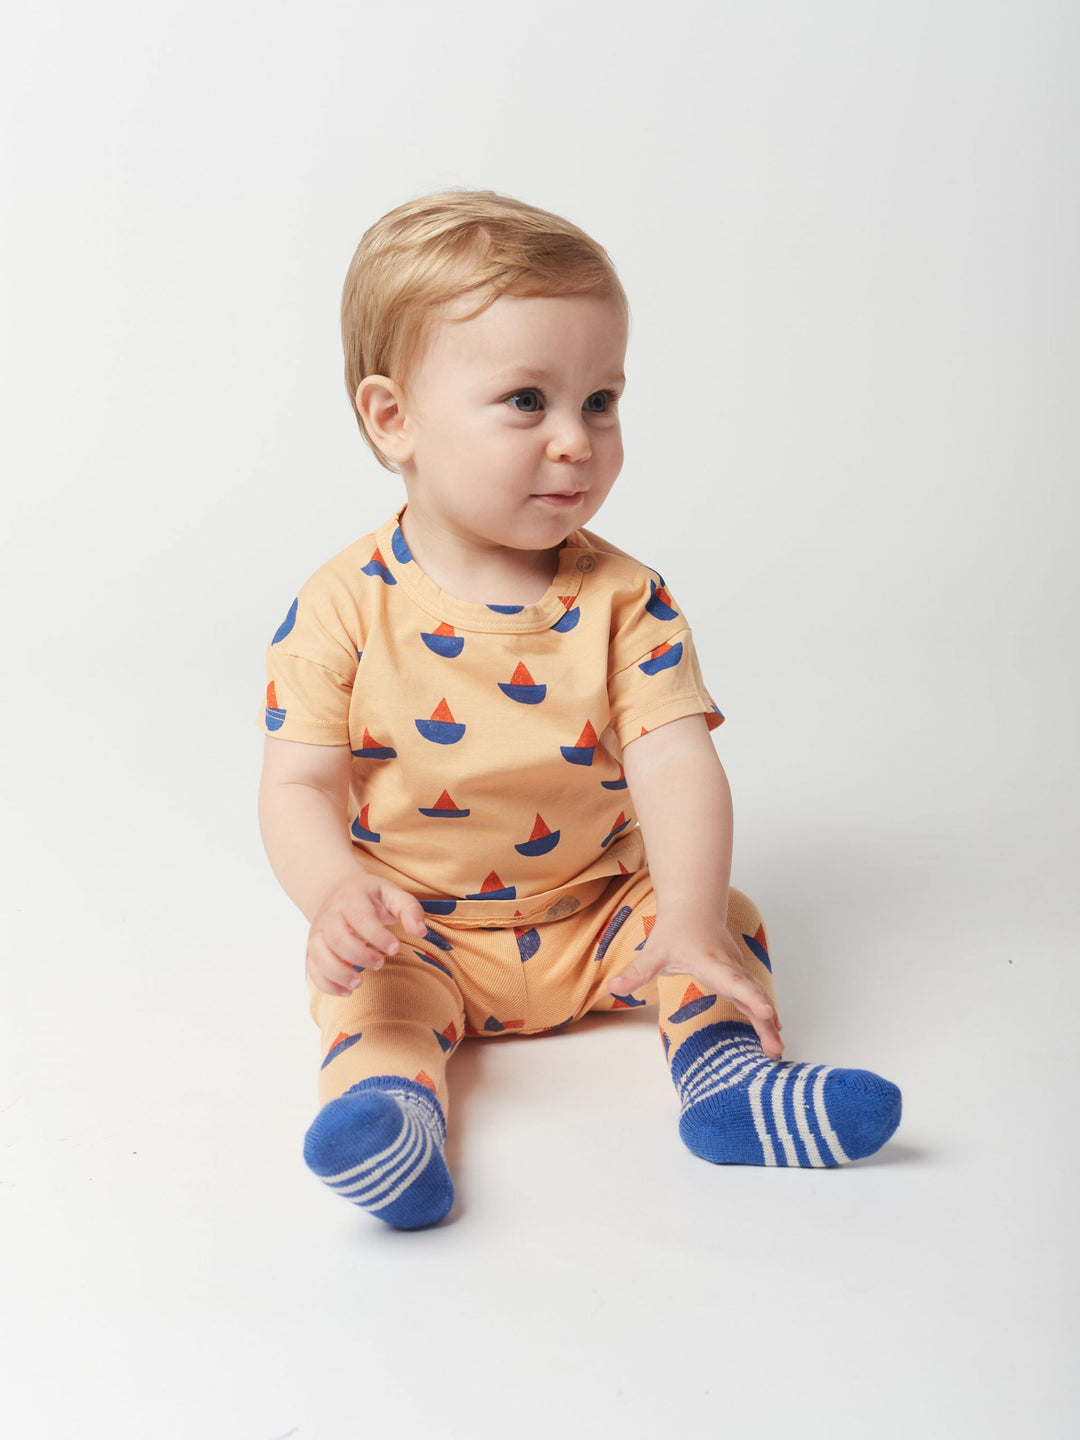 Sail Boat All Over Tee by Bobo Choses